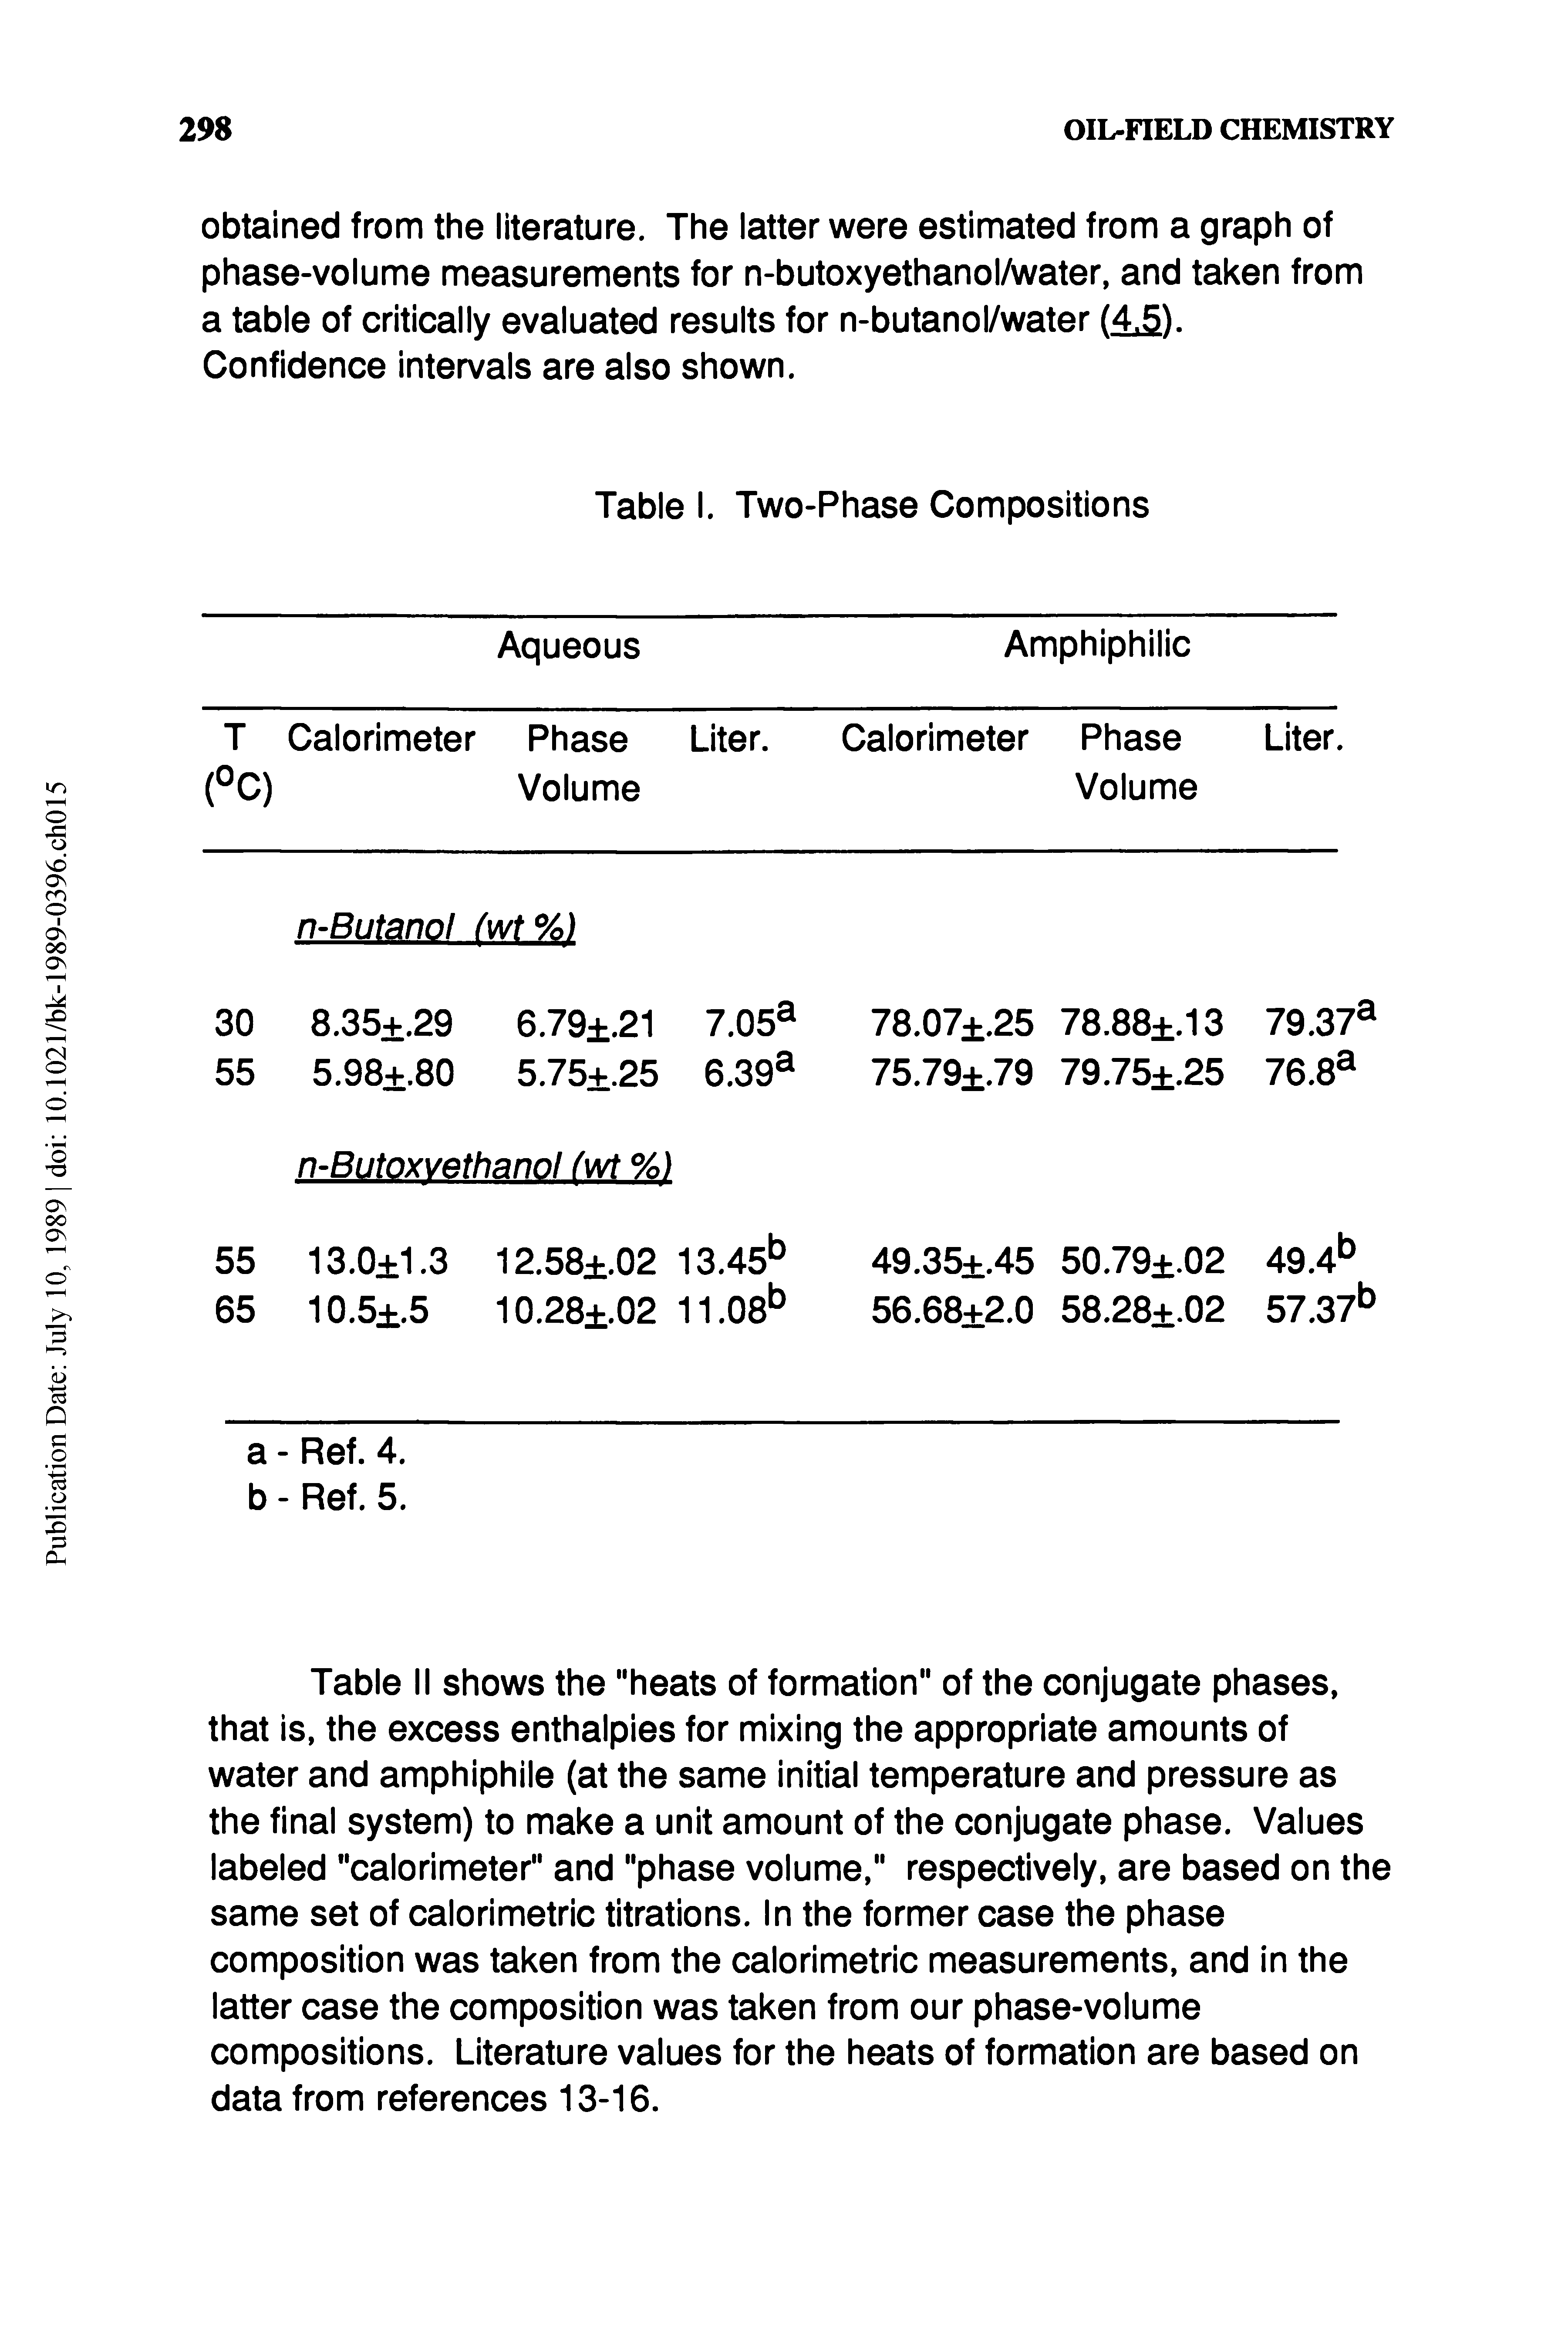 Table II shows the "heats of formation" of the conjugate phases, that is, the excess enthalpies for mixing the appropriate amounts of water and amphiphile (at the same initial temperature and pressure as the final system) to make a unit amount of the conjugate phase. Values labeled "calorimeter" and "phase volume," respectively, are based on the same set of calorimetric titrations. In the former case the phase composition was taken from the calorimetric measurements, and in the latter case the composition was taken from our phase-volume compositions. Literature values for the heats of formation are based on data from references 13-16.